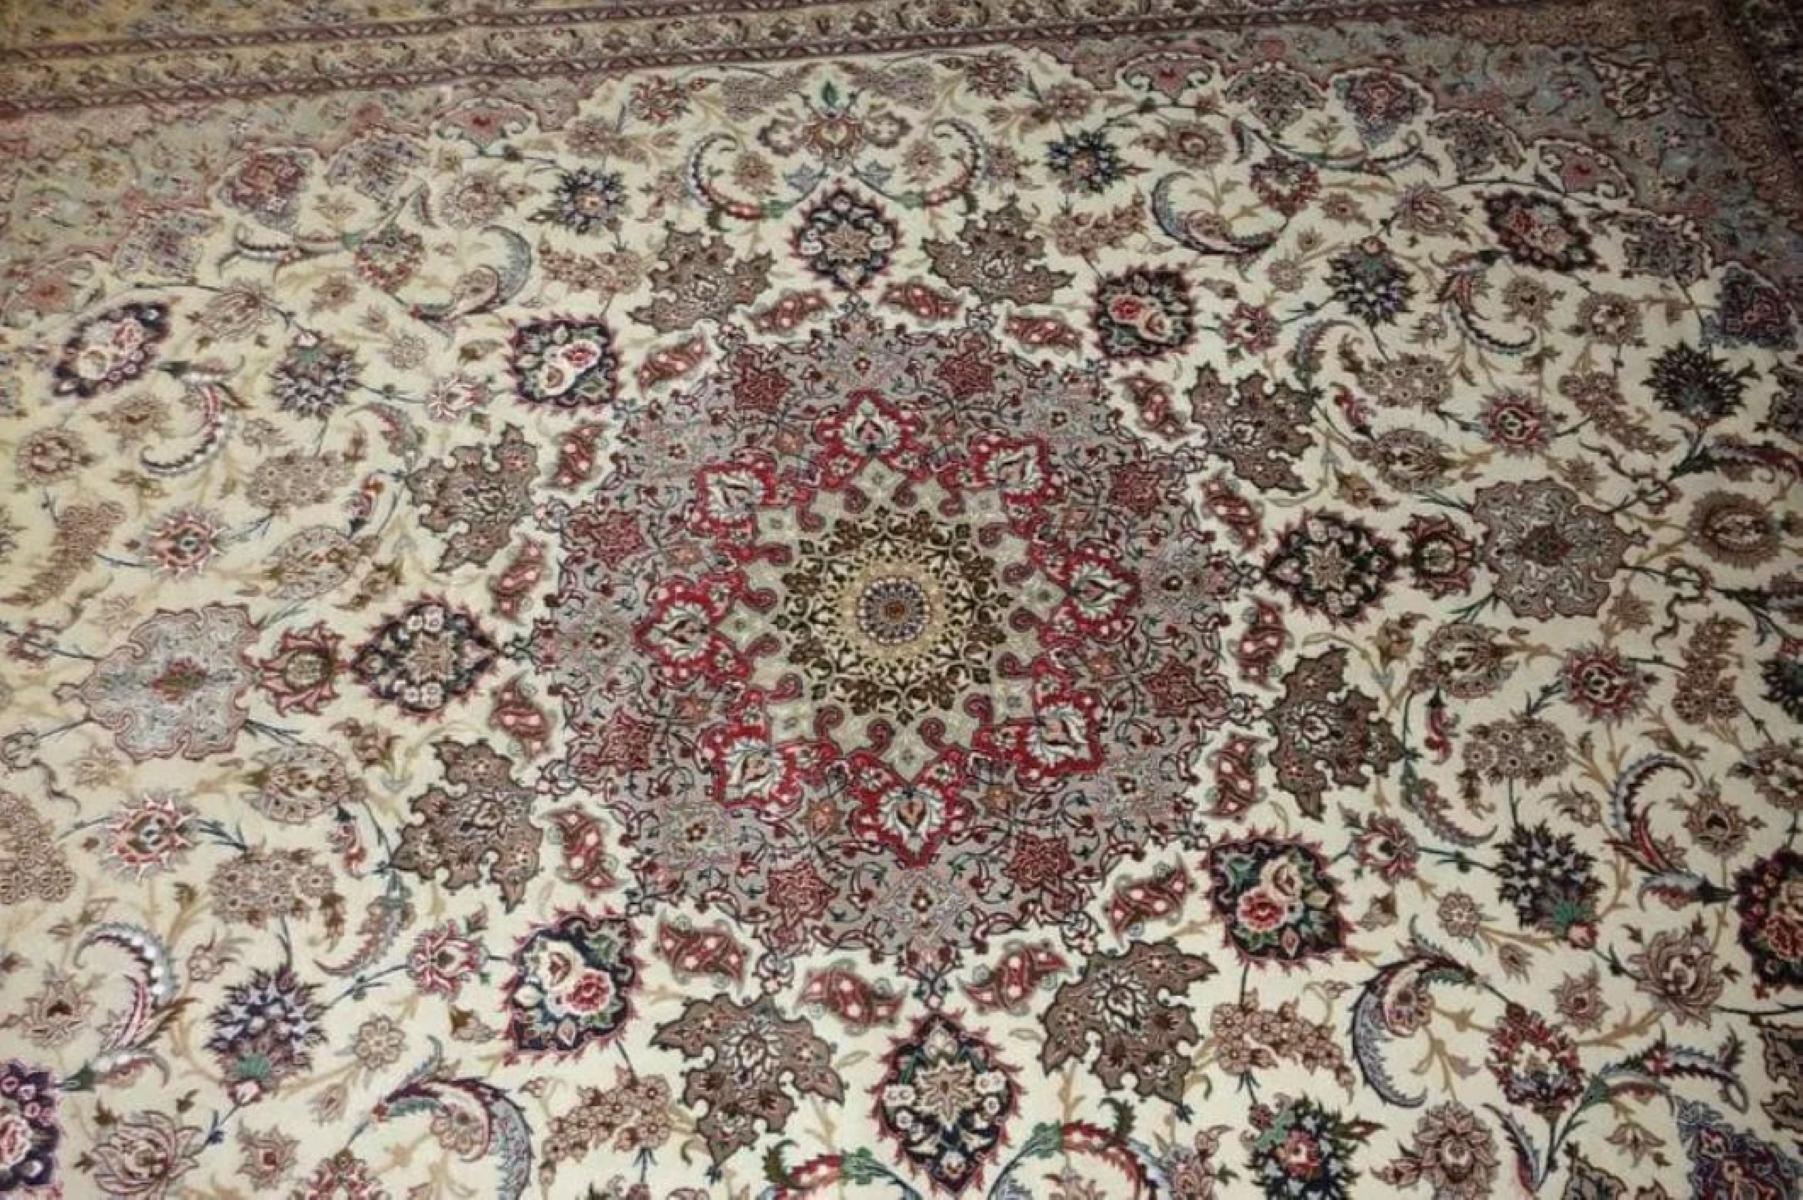 Very fine Persian Isfahan Silk & Wool Rug - 10' x 13' In Excellent Condition For Sale In Newmanstown, PA